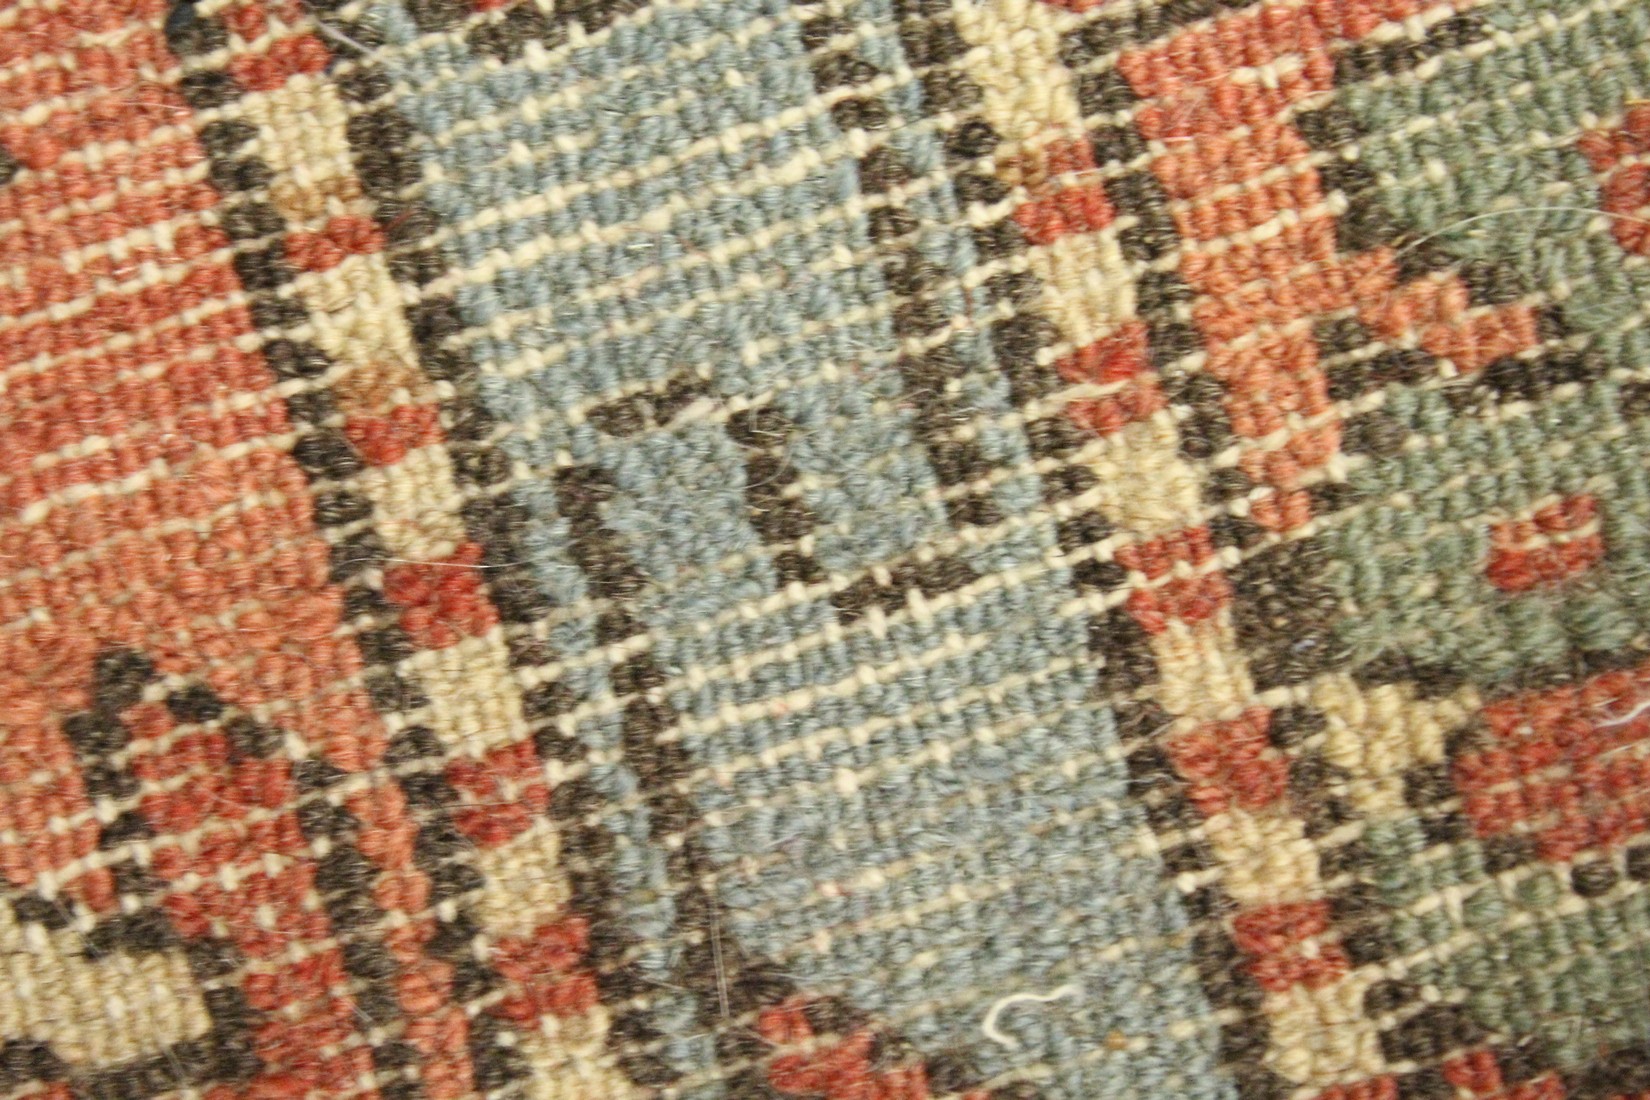 A SMALL PERSIAN RUG, red ground with geometric decoration. 4ft 2ins x 2ft 7ins - Image 4 of 4